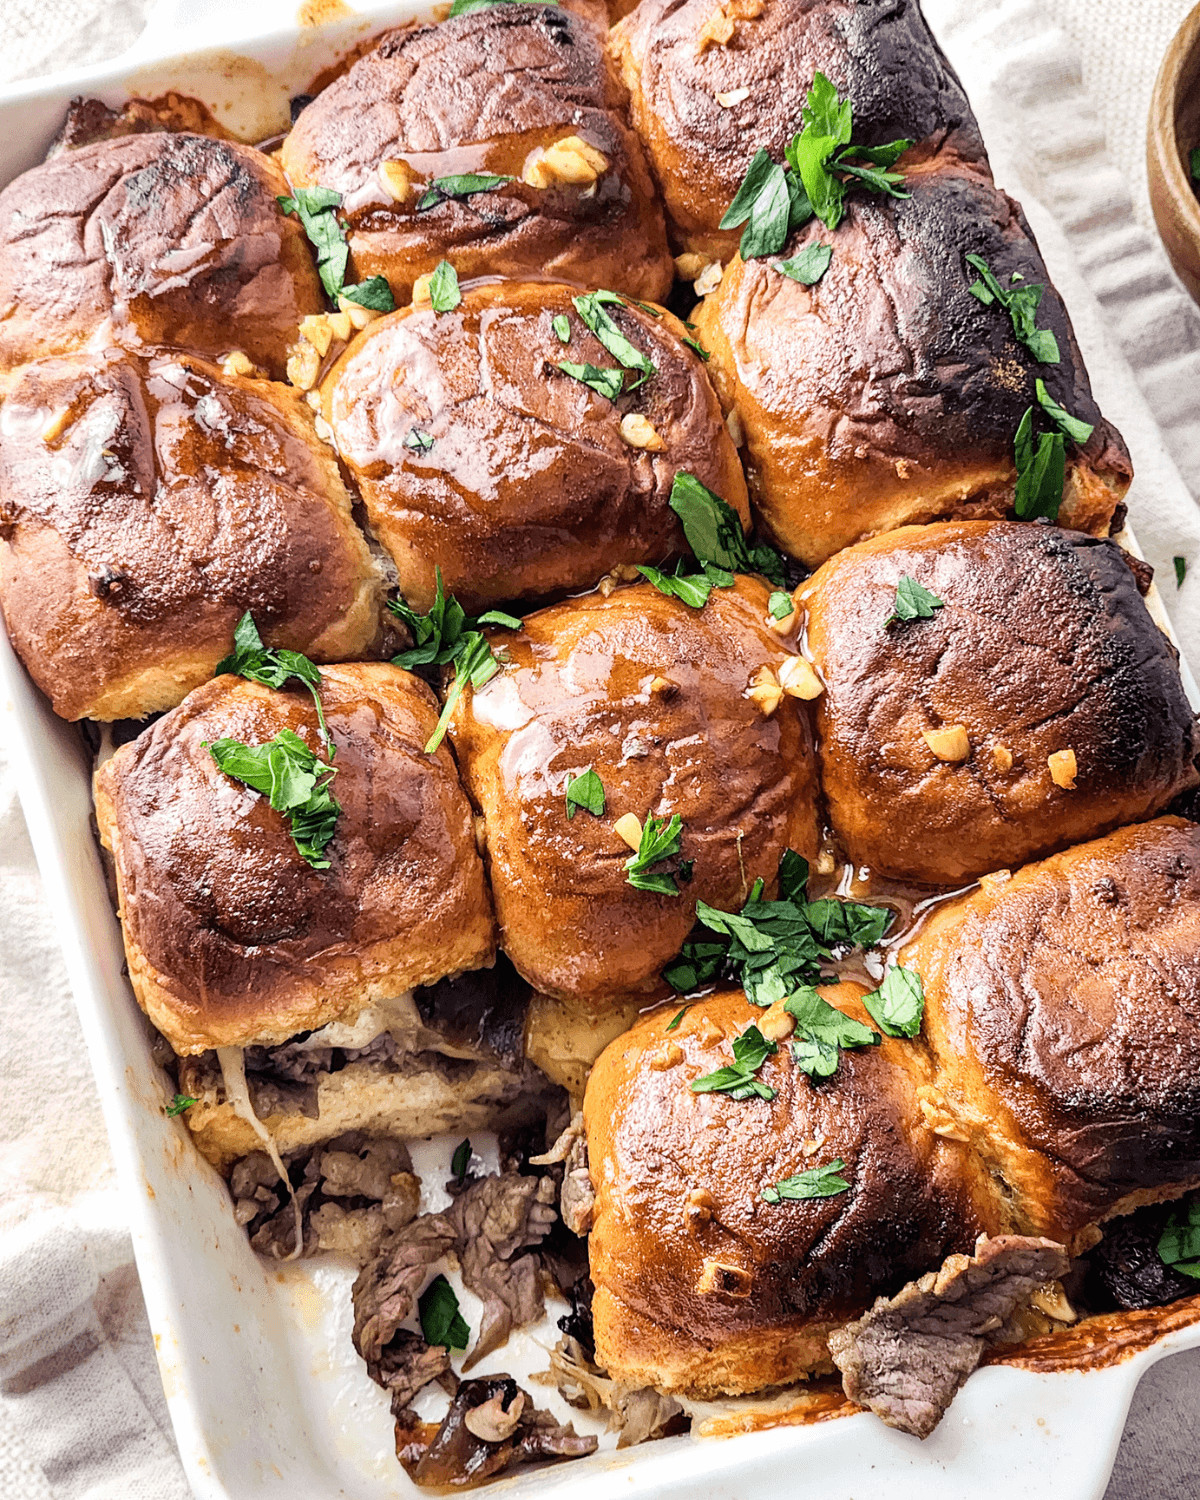 Baked steak and cheese sliders garnished with fresh parsley in a white baking dish.